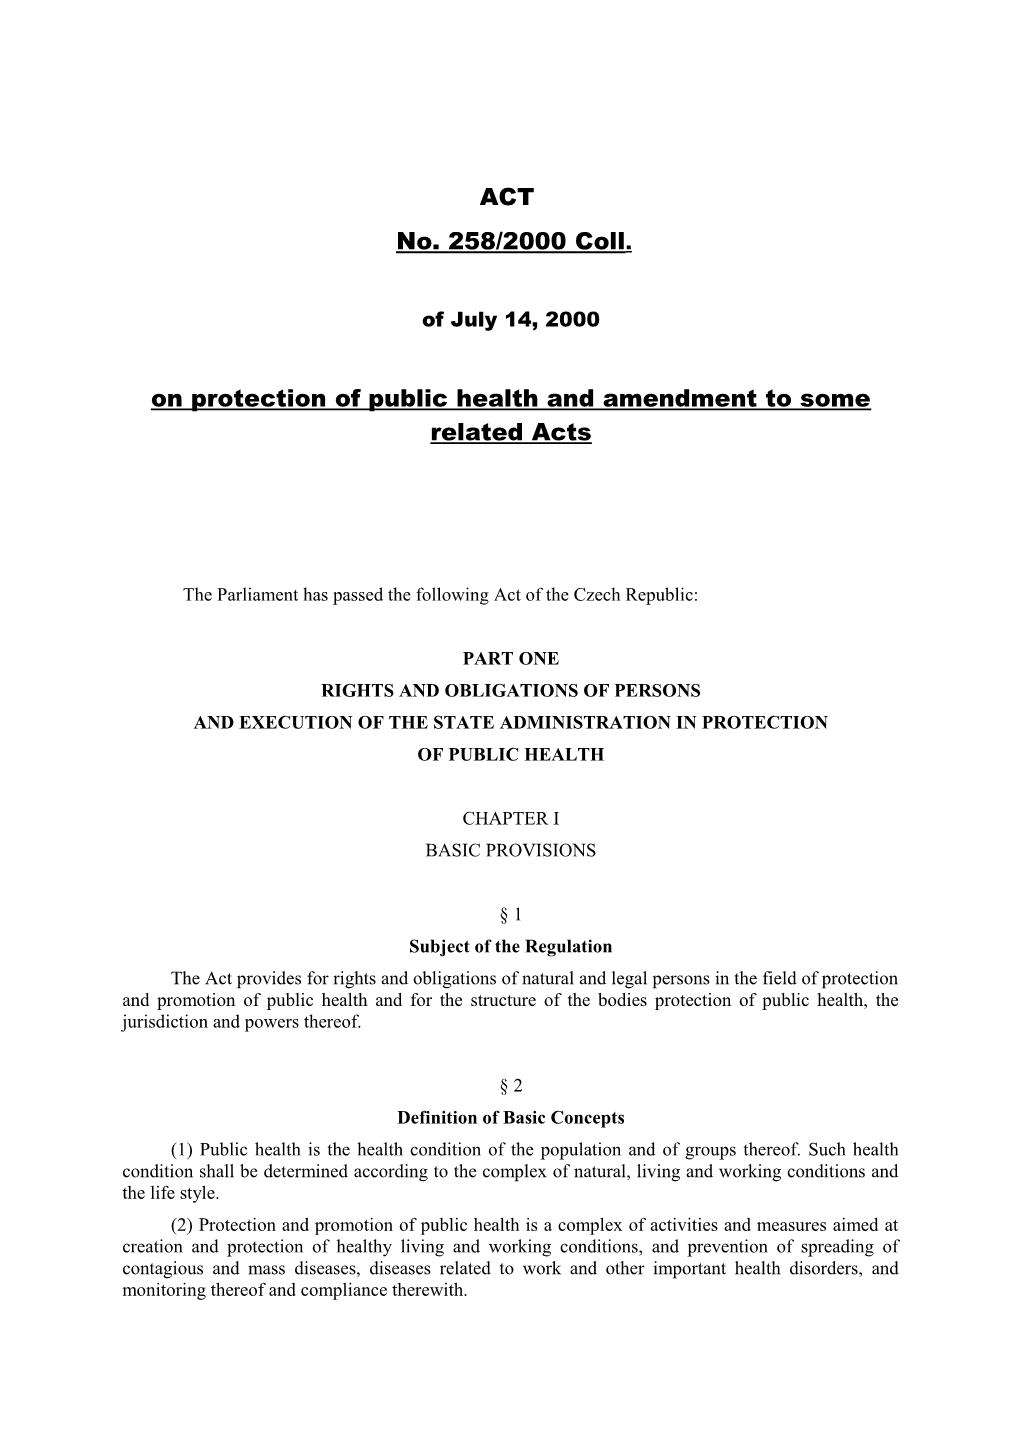 On Protection of Public Health and Amendment to Some Related Acts